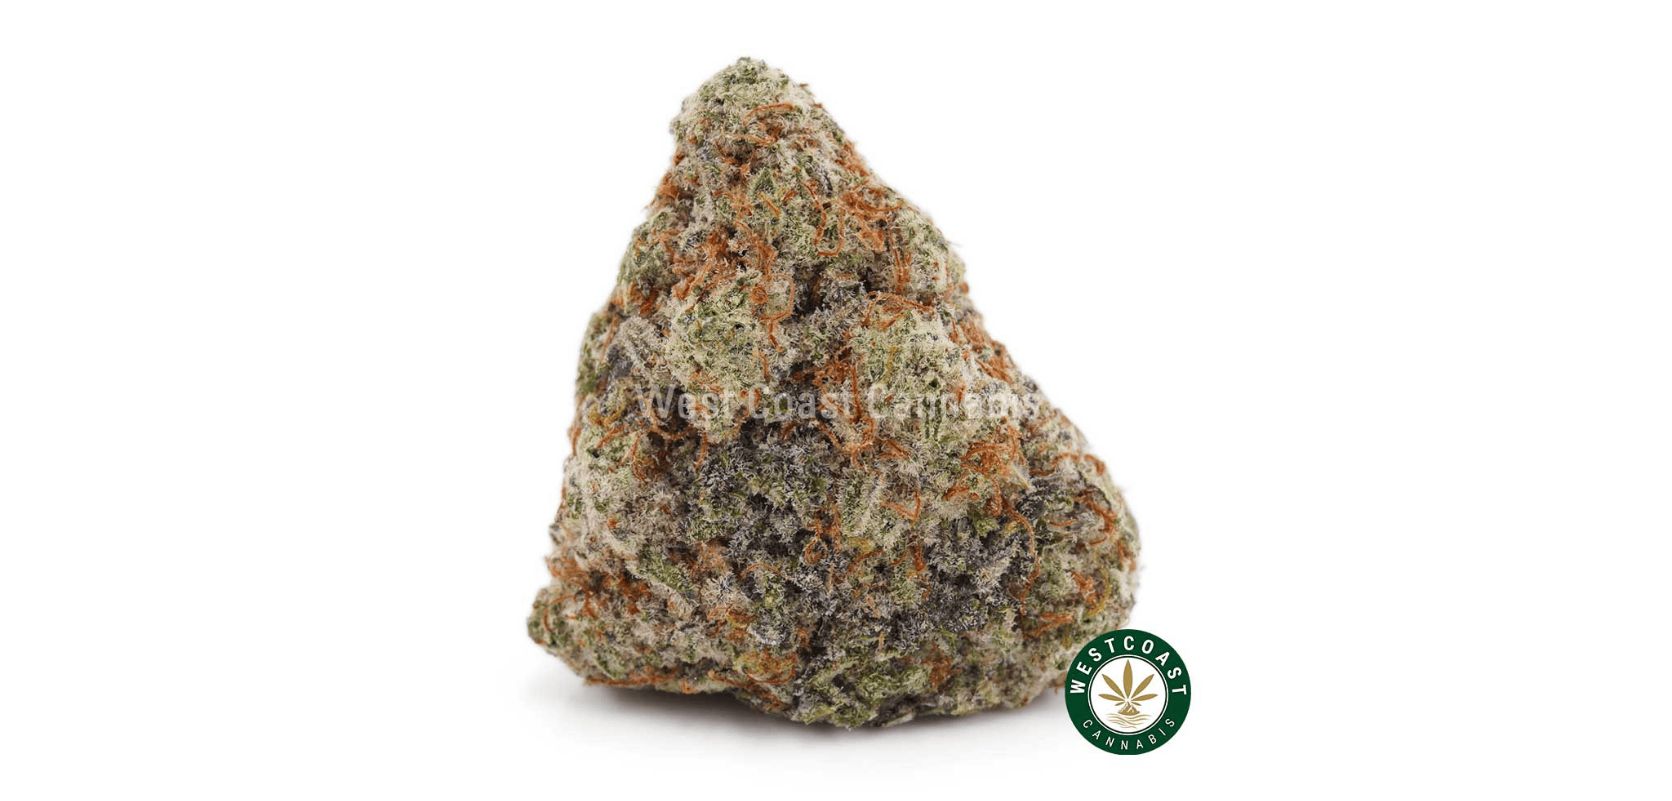 The Miracle Alien Cookies strain is 50 percent Indica and 50 percent Sativa with the dankest sour citrus flavour and herbal aroma. 